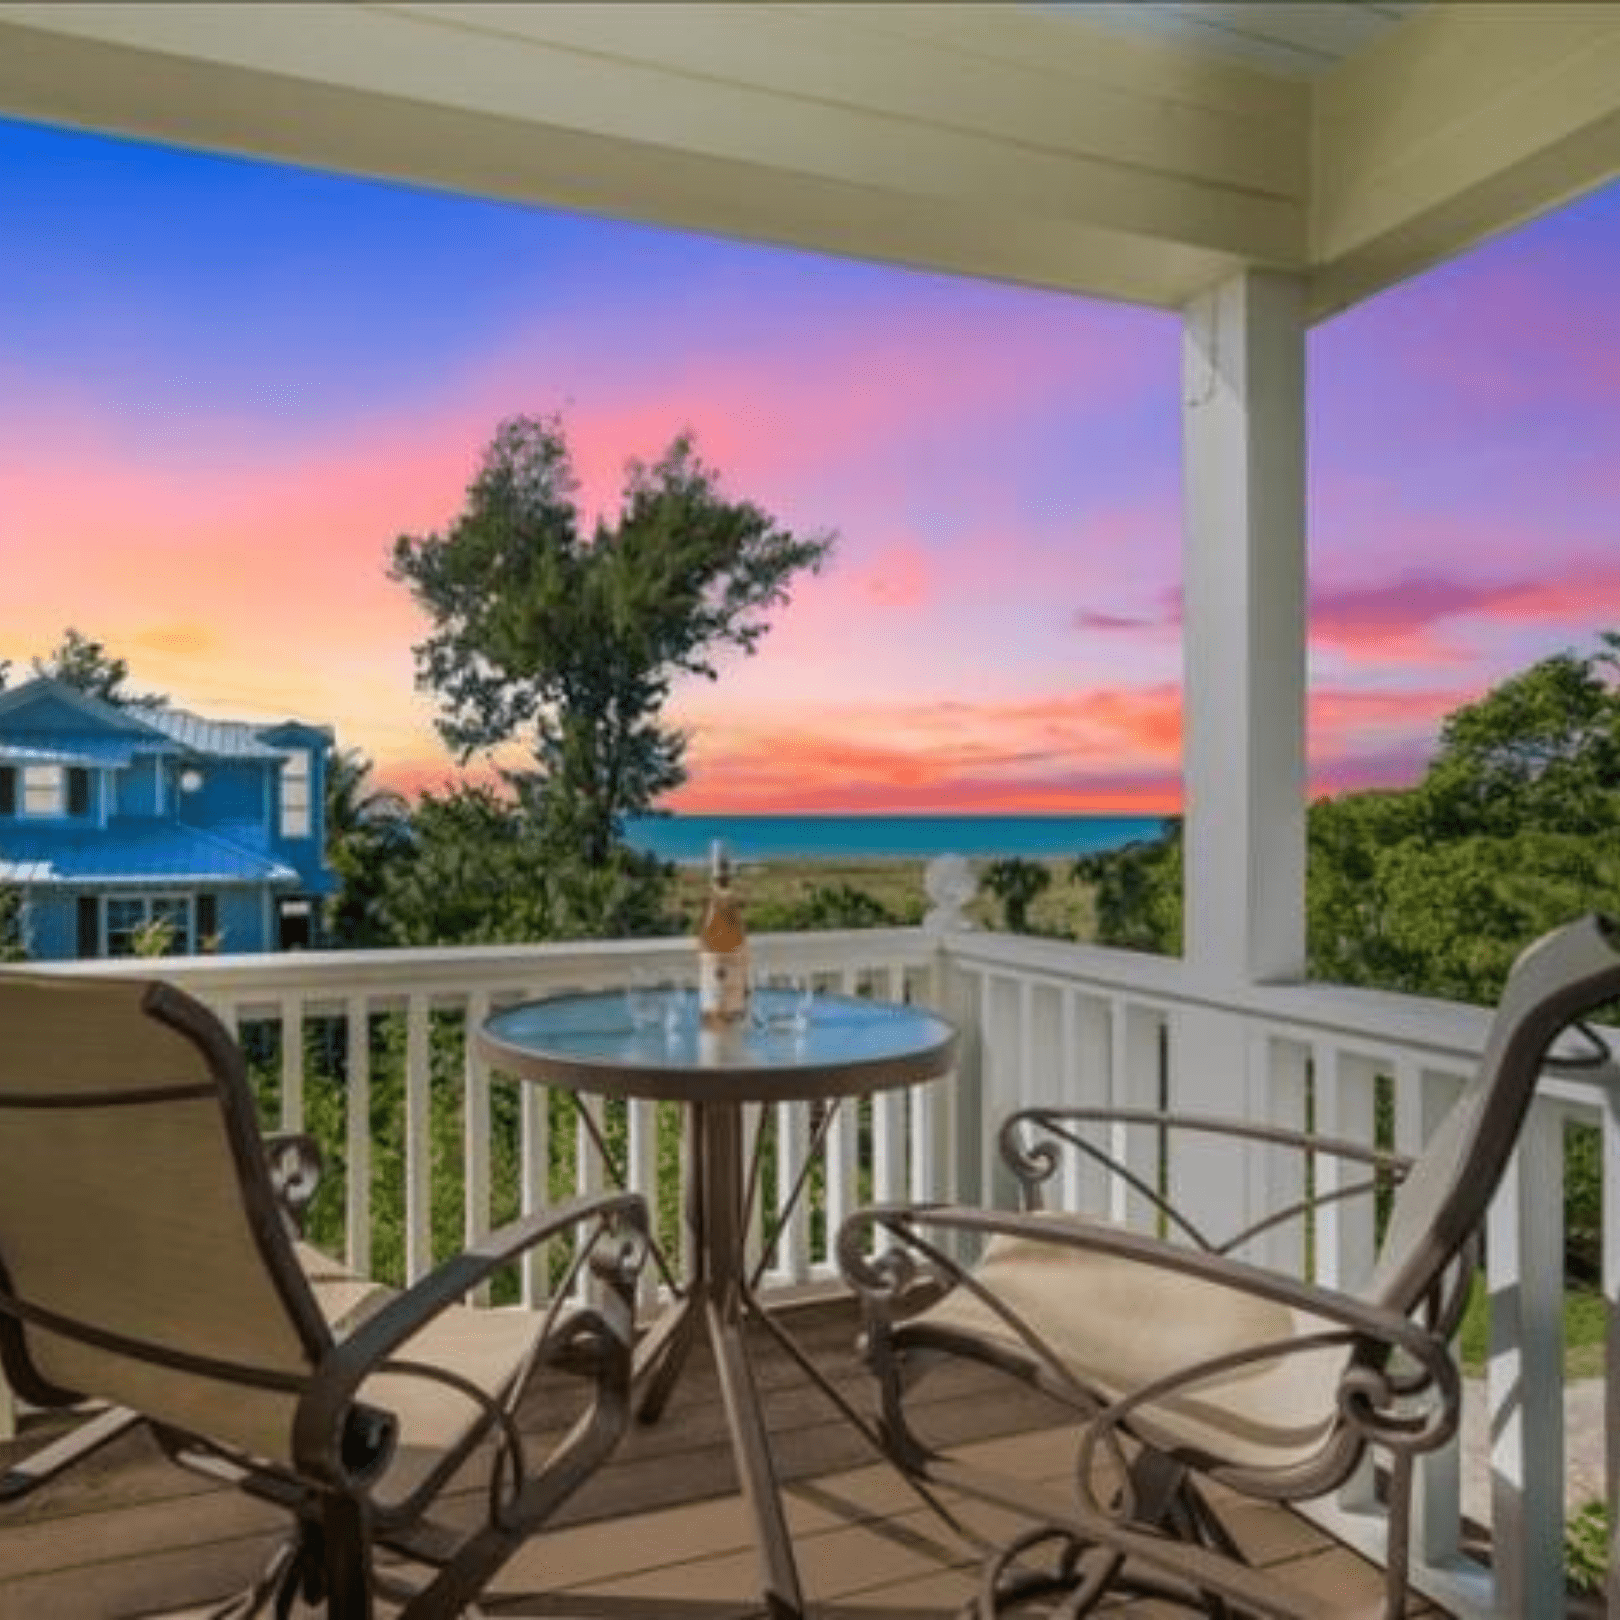 At our Anna Maria island vacation rentals here is a covered balcony view from behind two patio chairs and a small side table with a bottle of wine and two glasses looking out at a sunset off the coast of Anna Maria Island